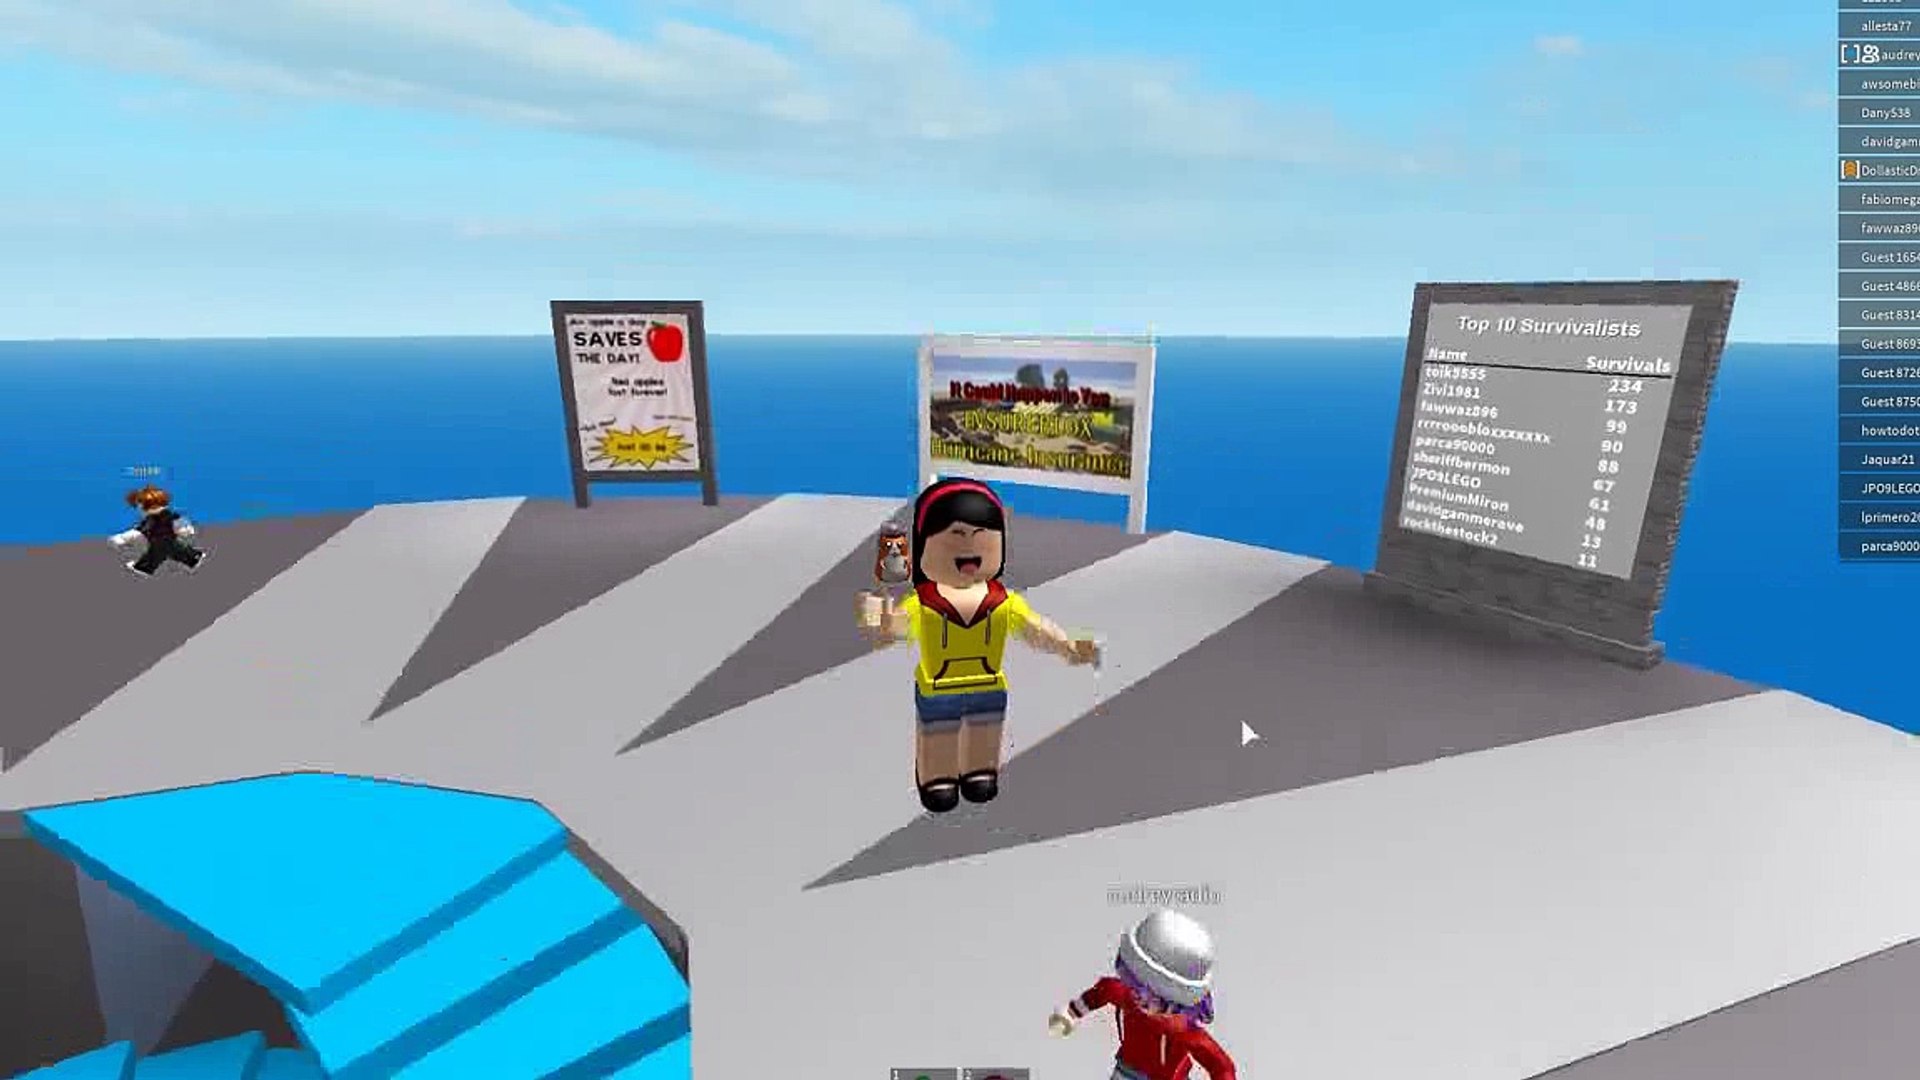 The Floor Sucked Me In Roblox Survive The Natural Disasters With - the floor sucked me in roblox survive the natural disasters with